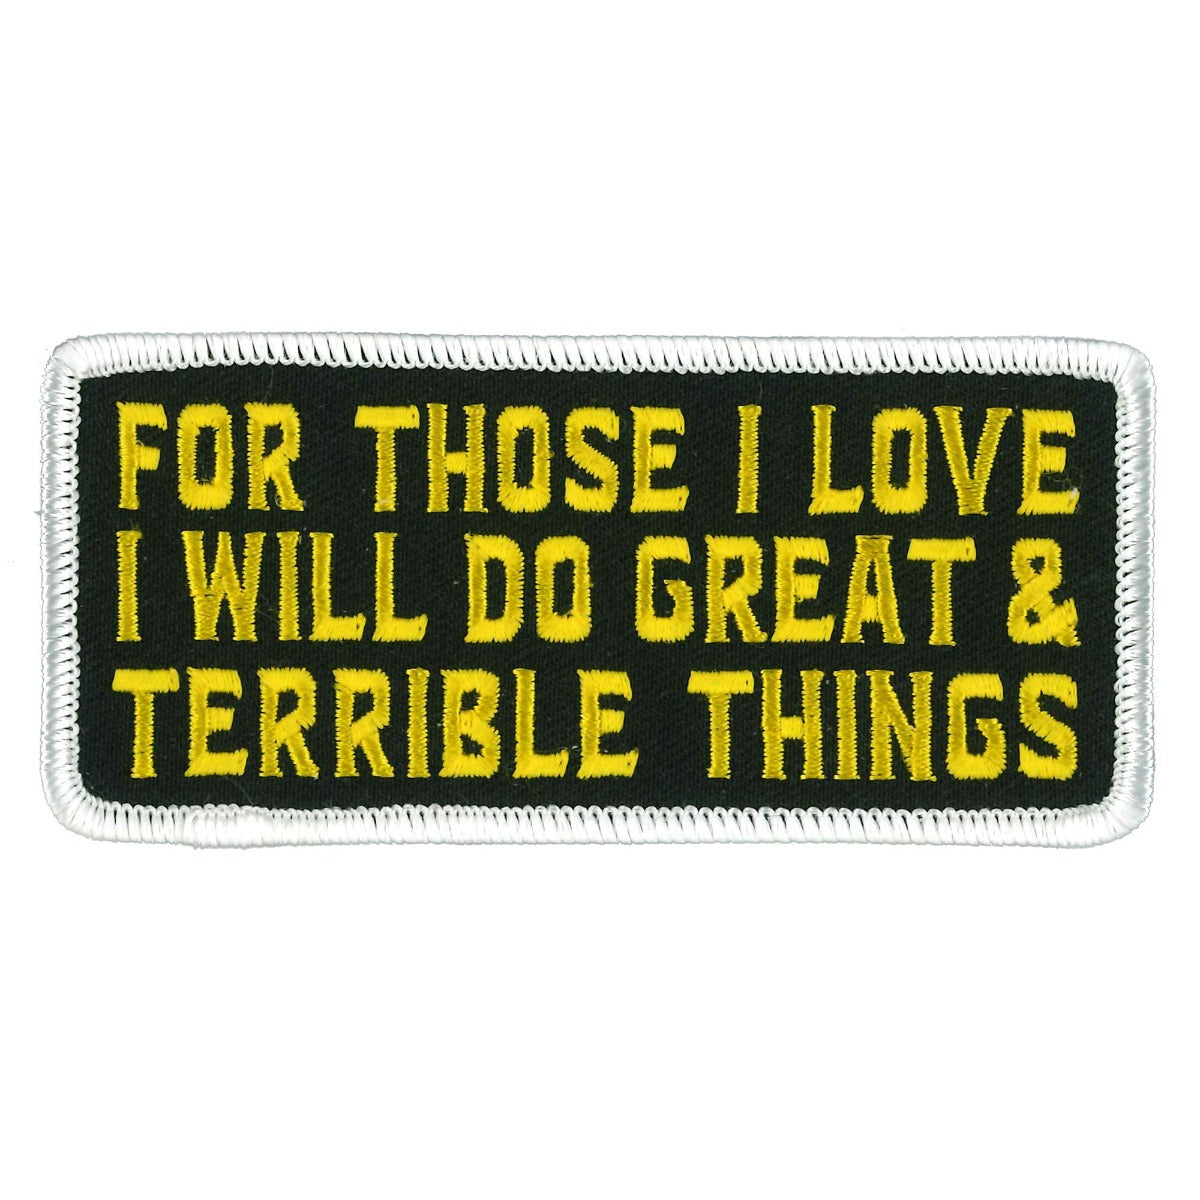 Hot Leathers 4" Terrible Things Patch